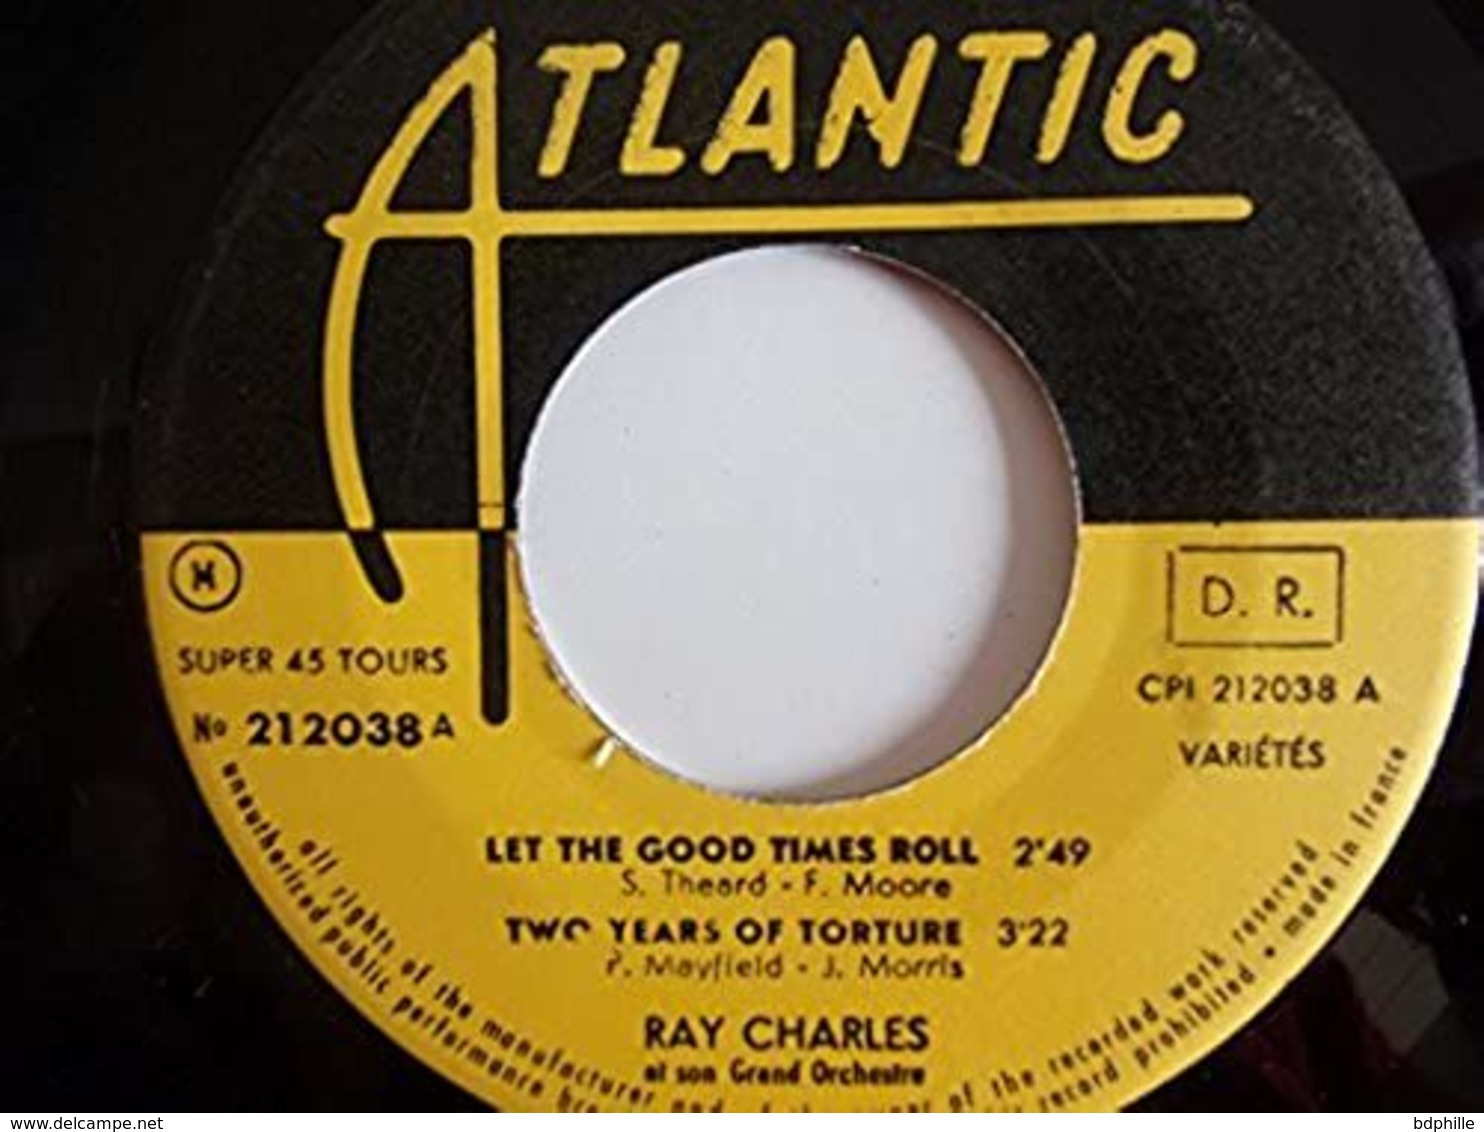 Ray Charles: Let The Good Times Roll  EP 45 - Blues